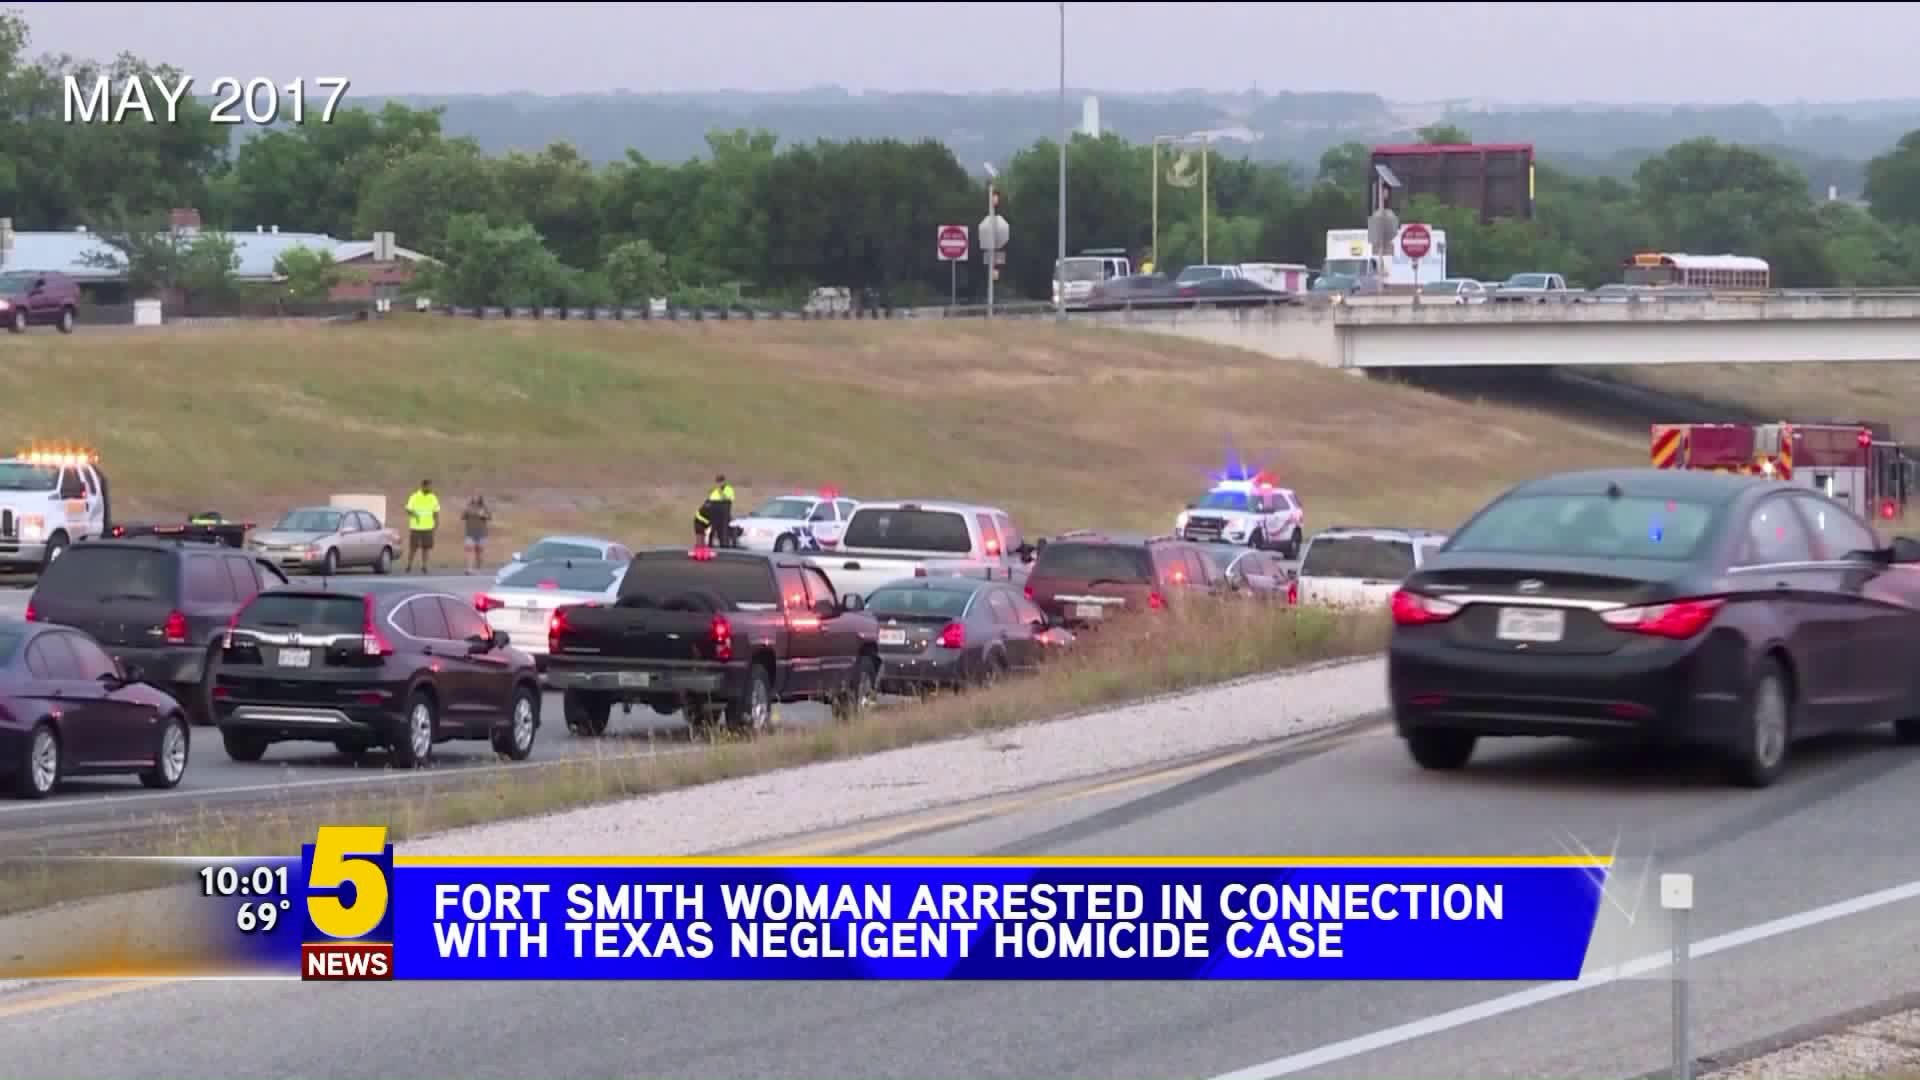 Fort Smith Woman Arrested In Texas Negligent Homicide Case